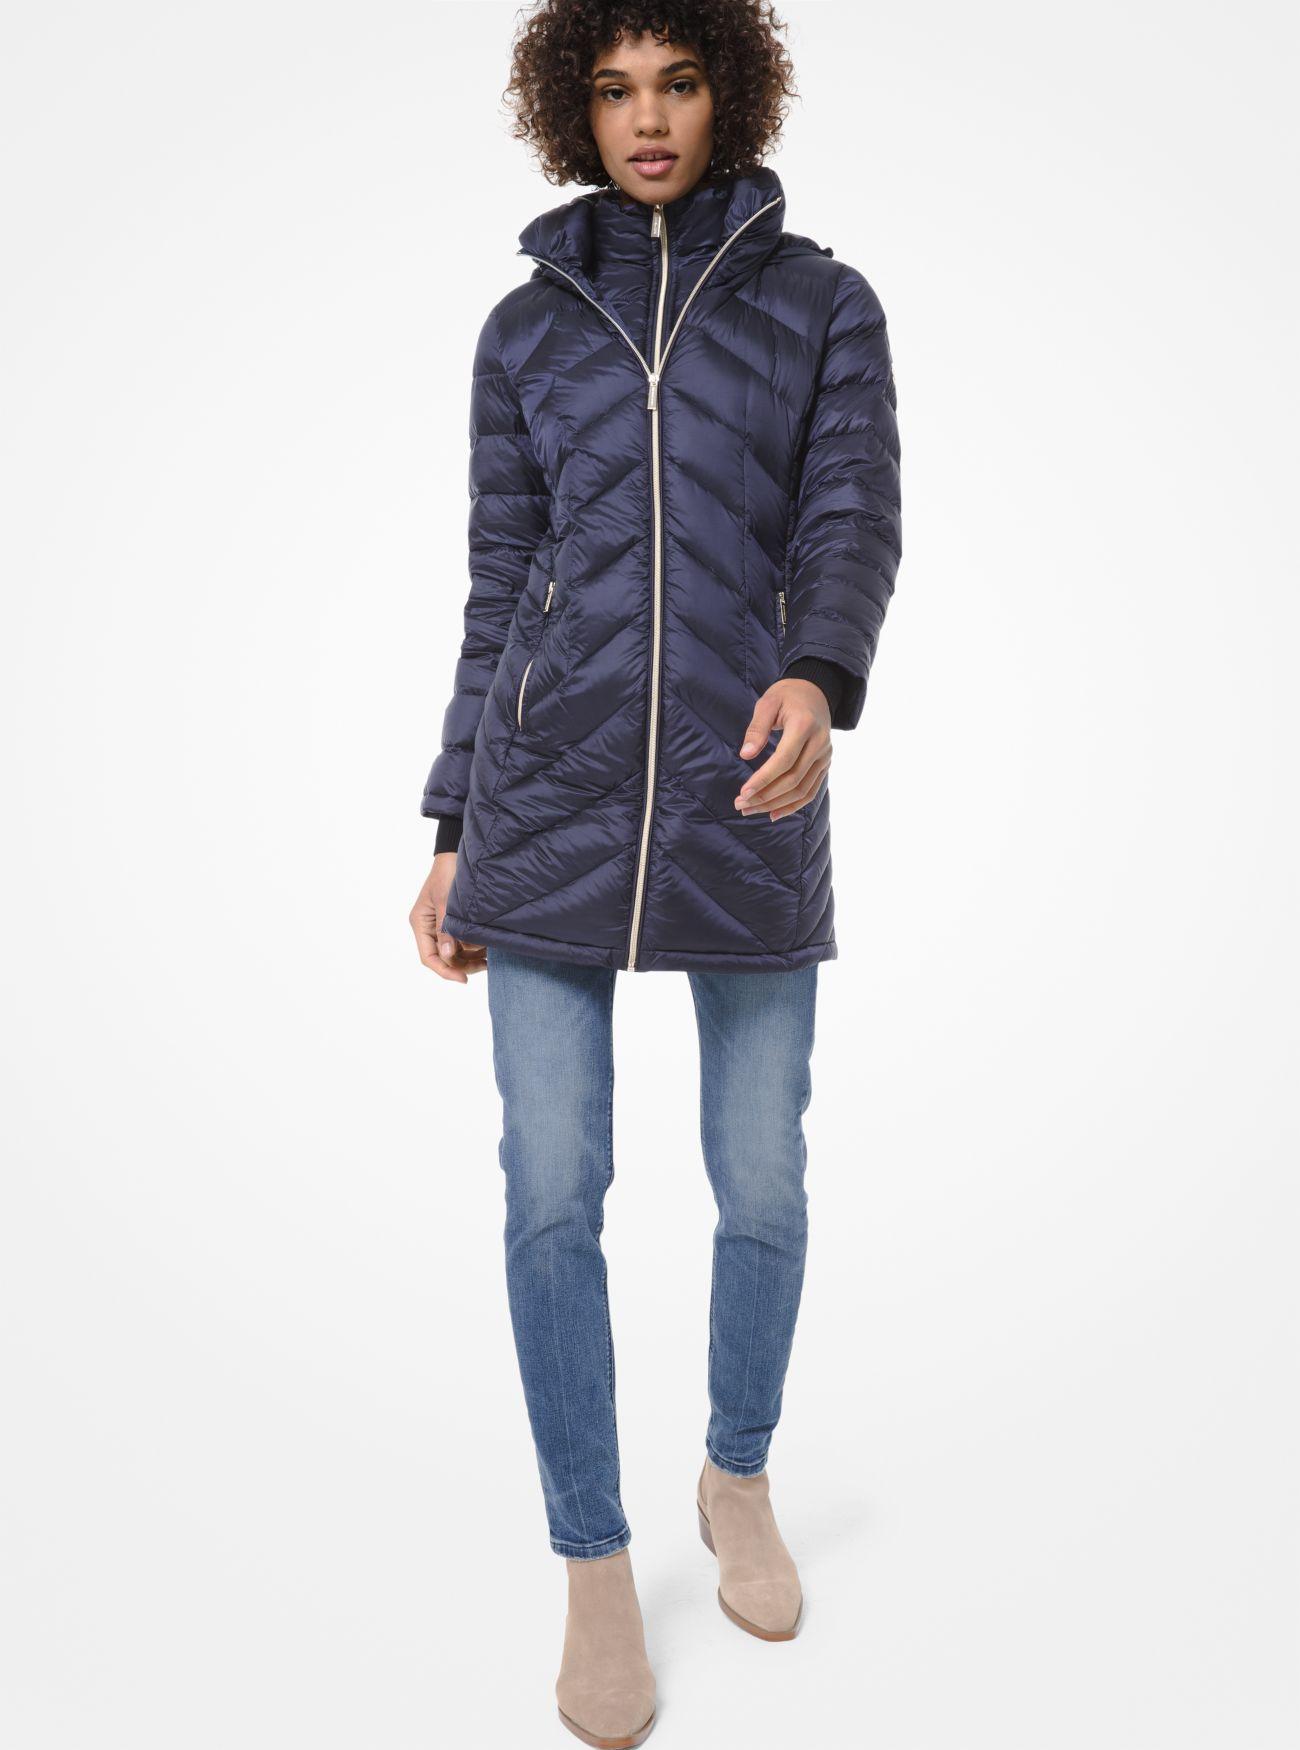 Michael Kors Synthetic Quilted Nylon Packable Puffer Coat in Blue - Lyst